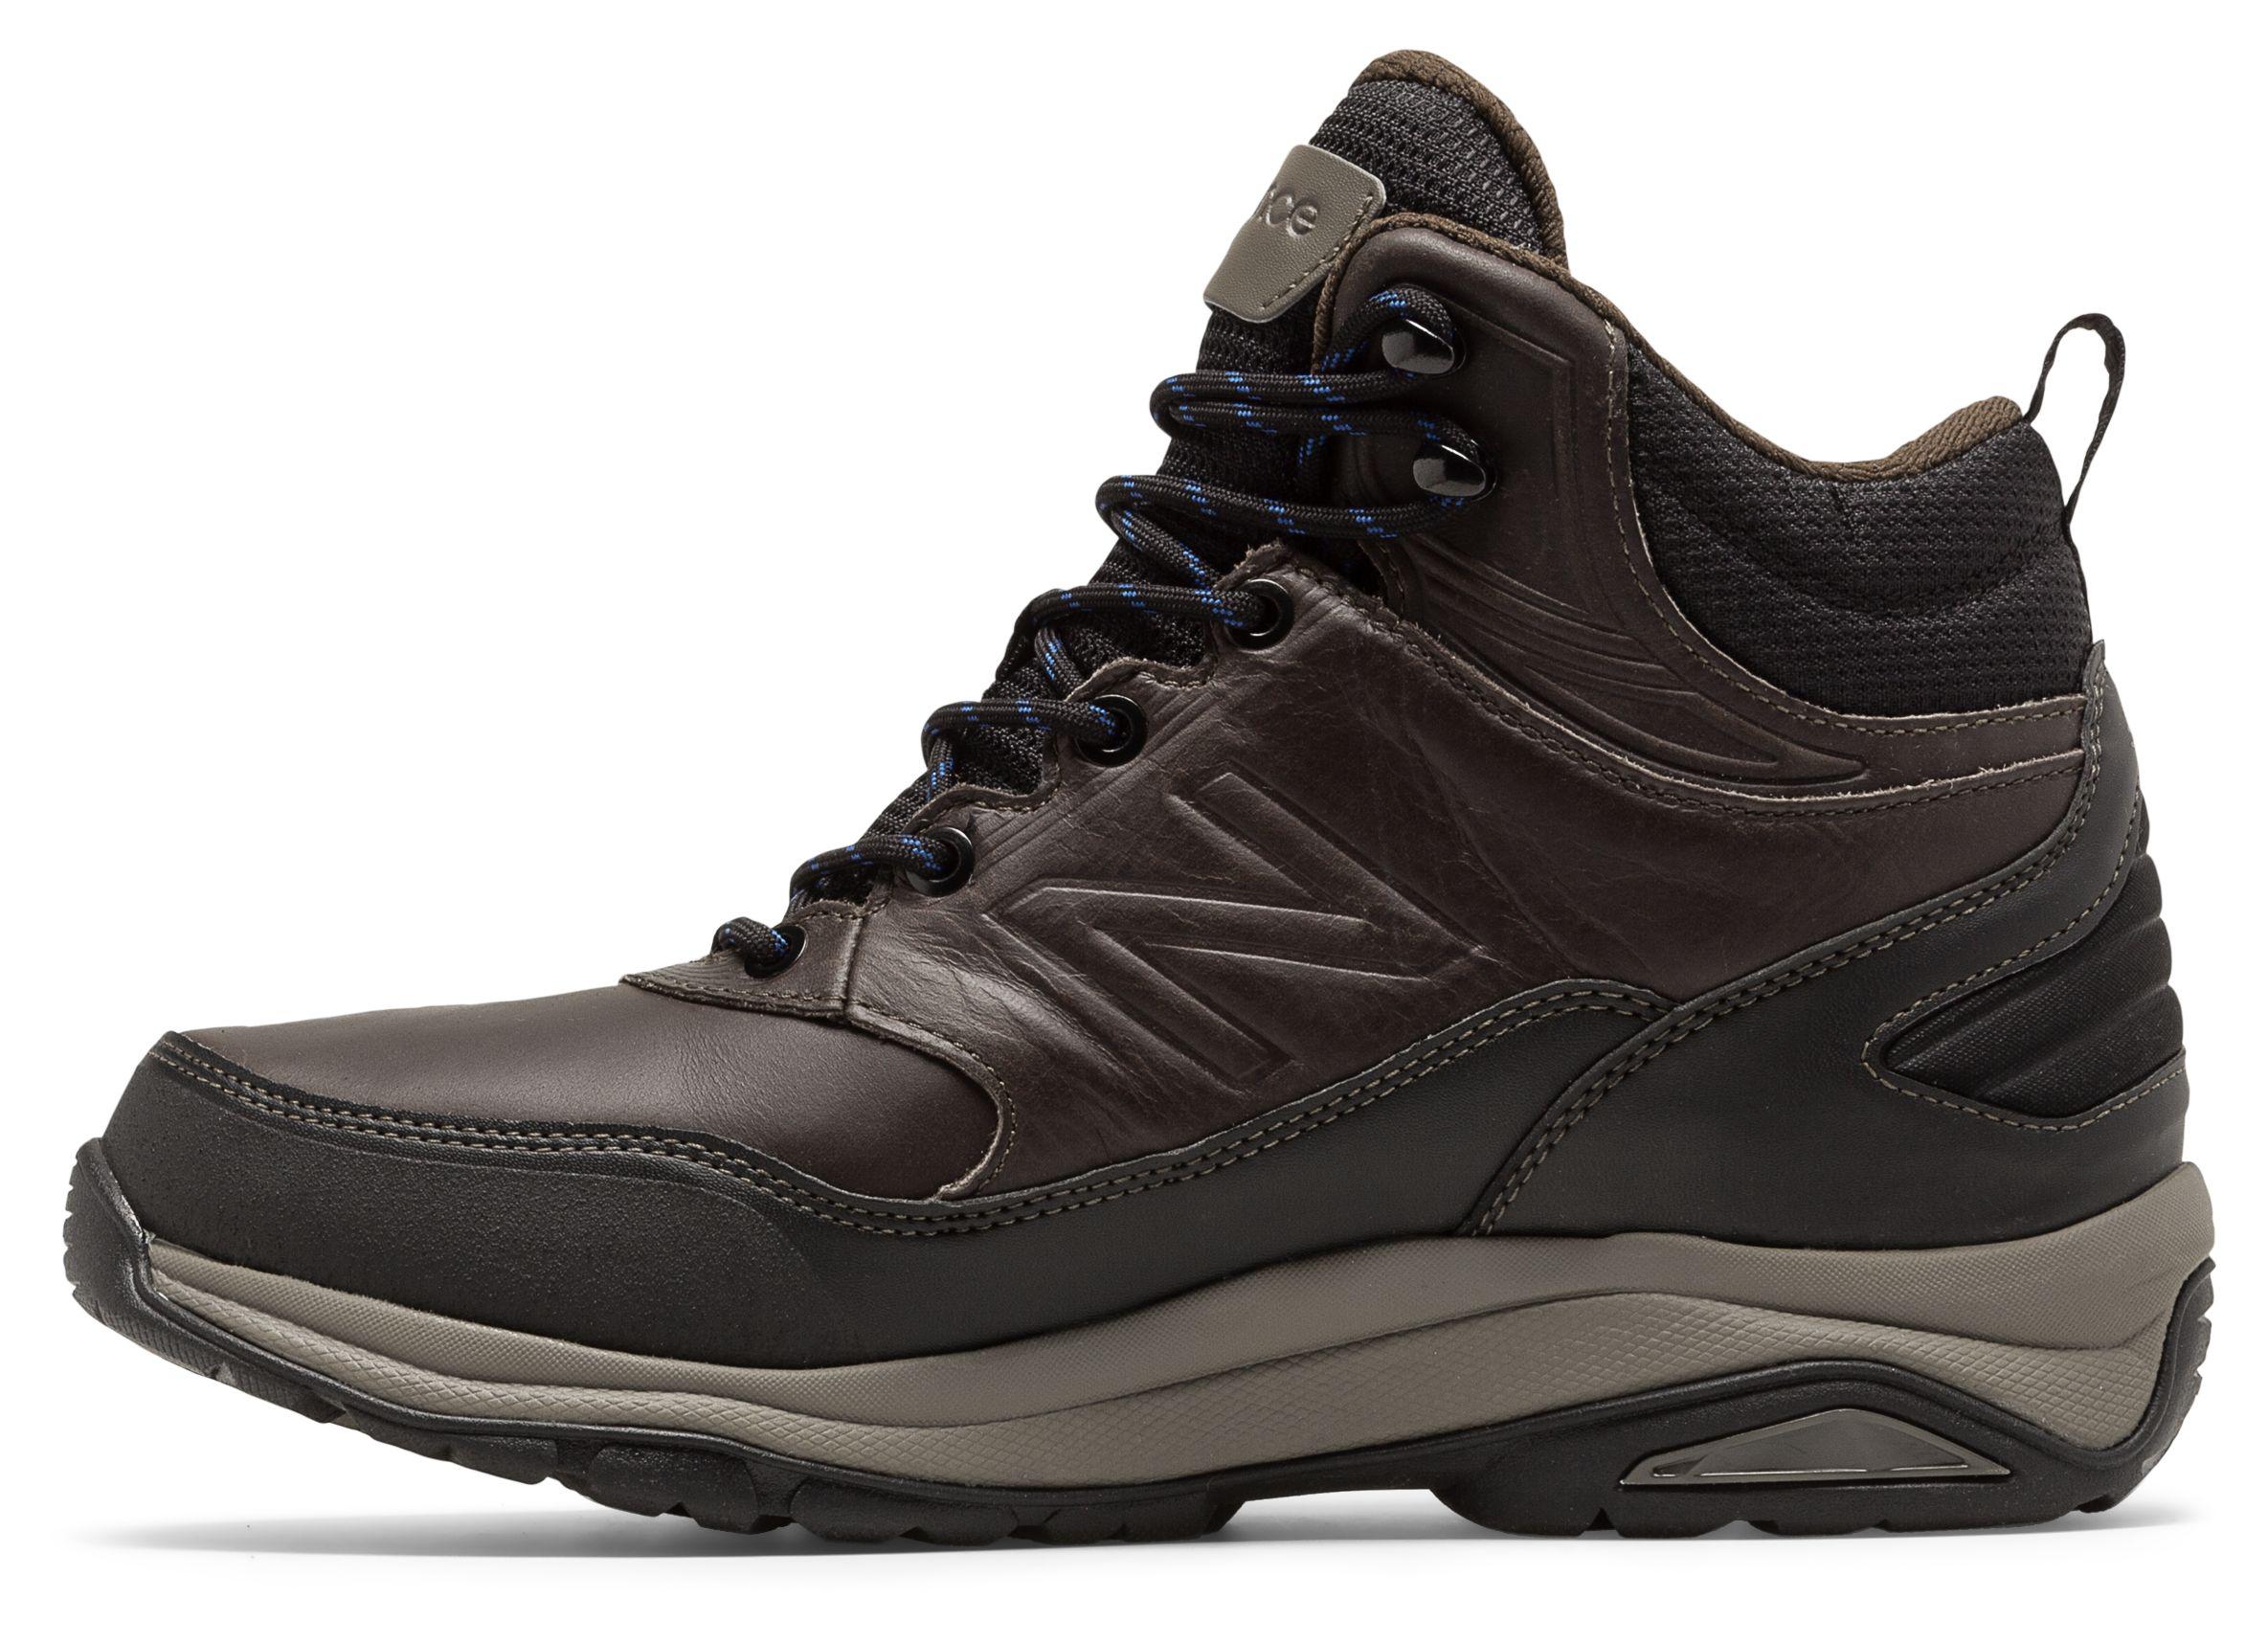 New Balance Leather 1400v1 in Dark Brown (Brown) for Men - Lyst